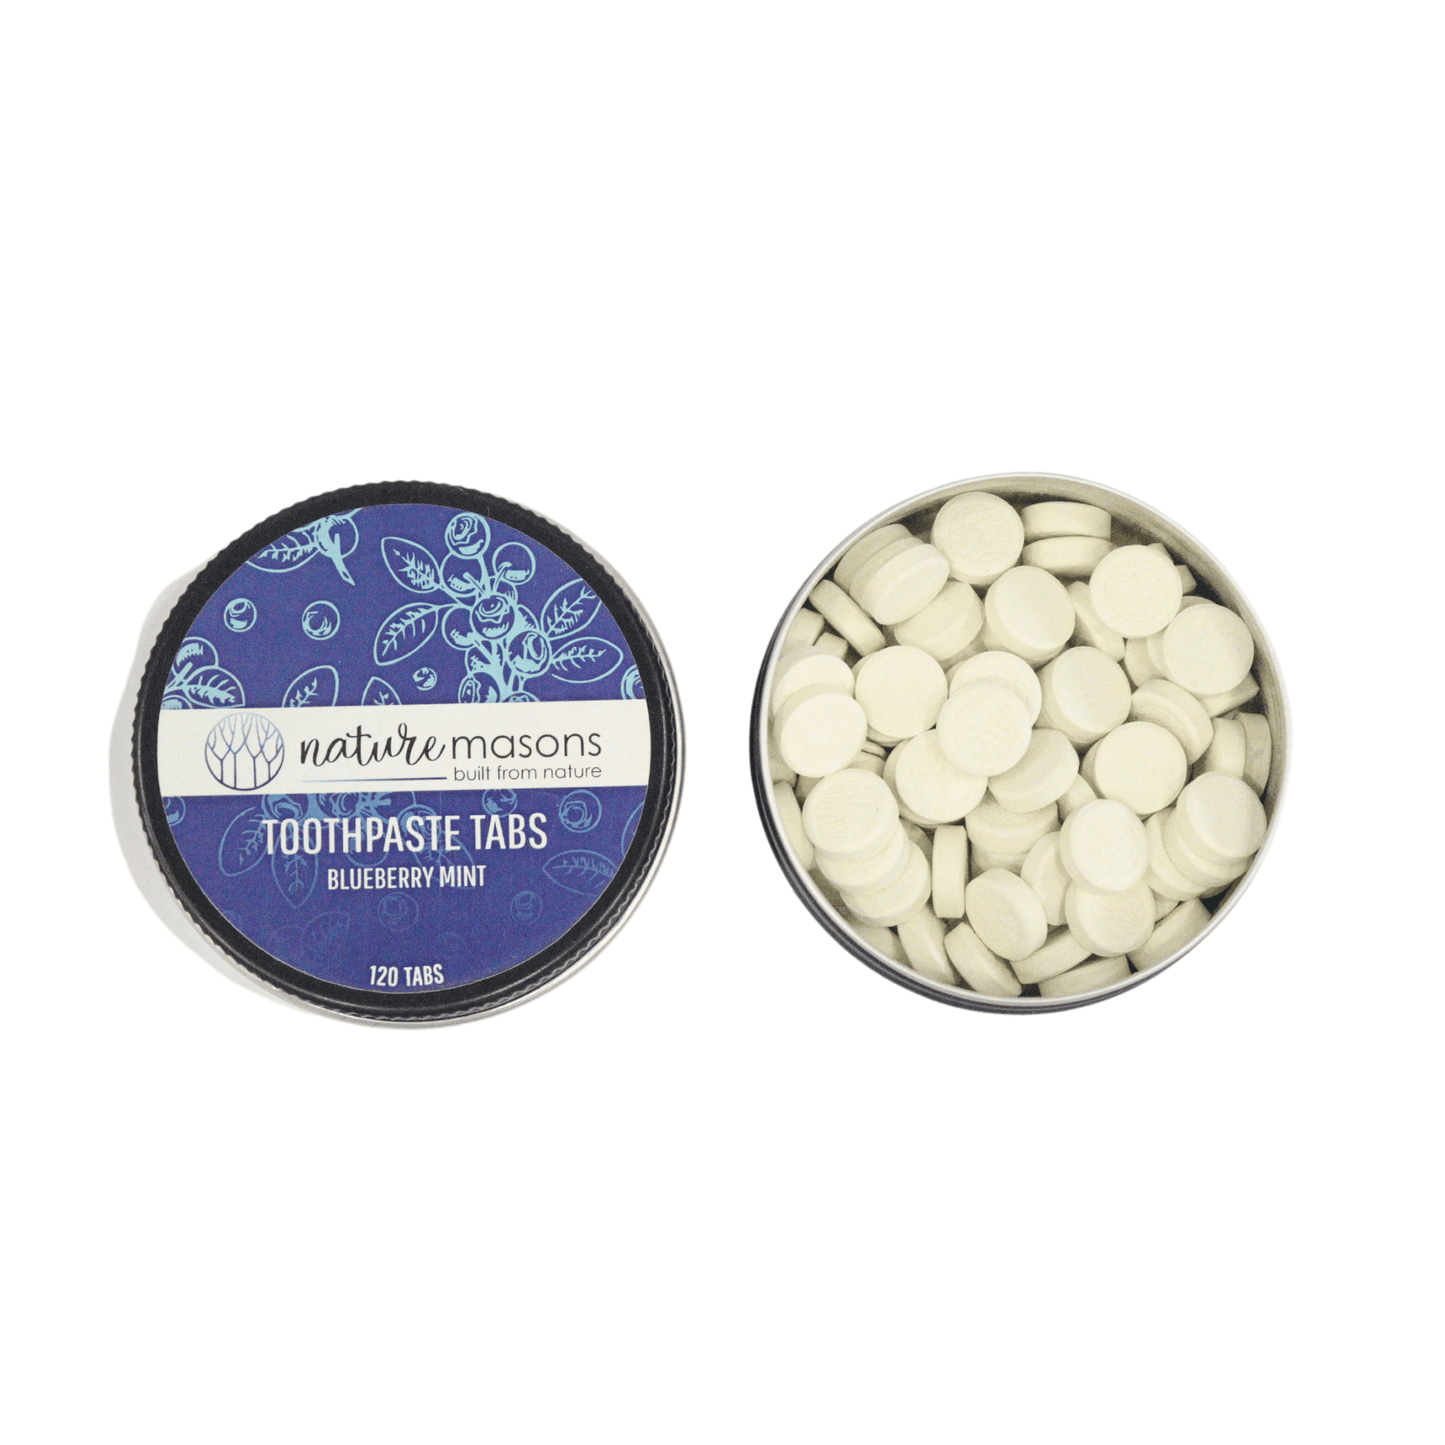 Toothpaste Tablets - Blueberry Mint The Nature Masons